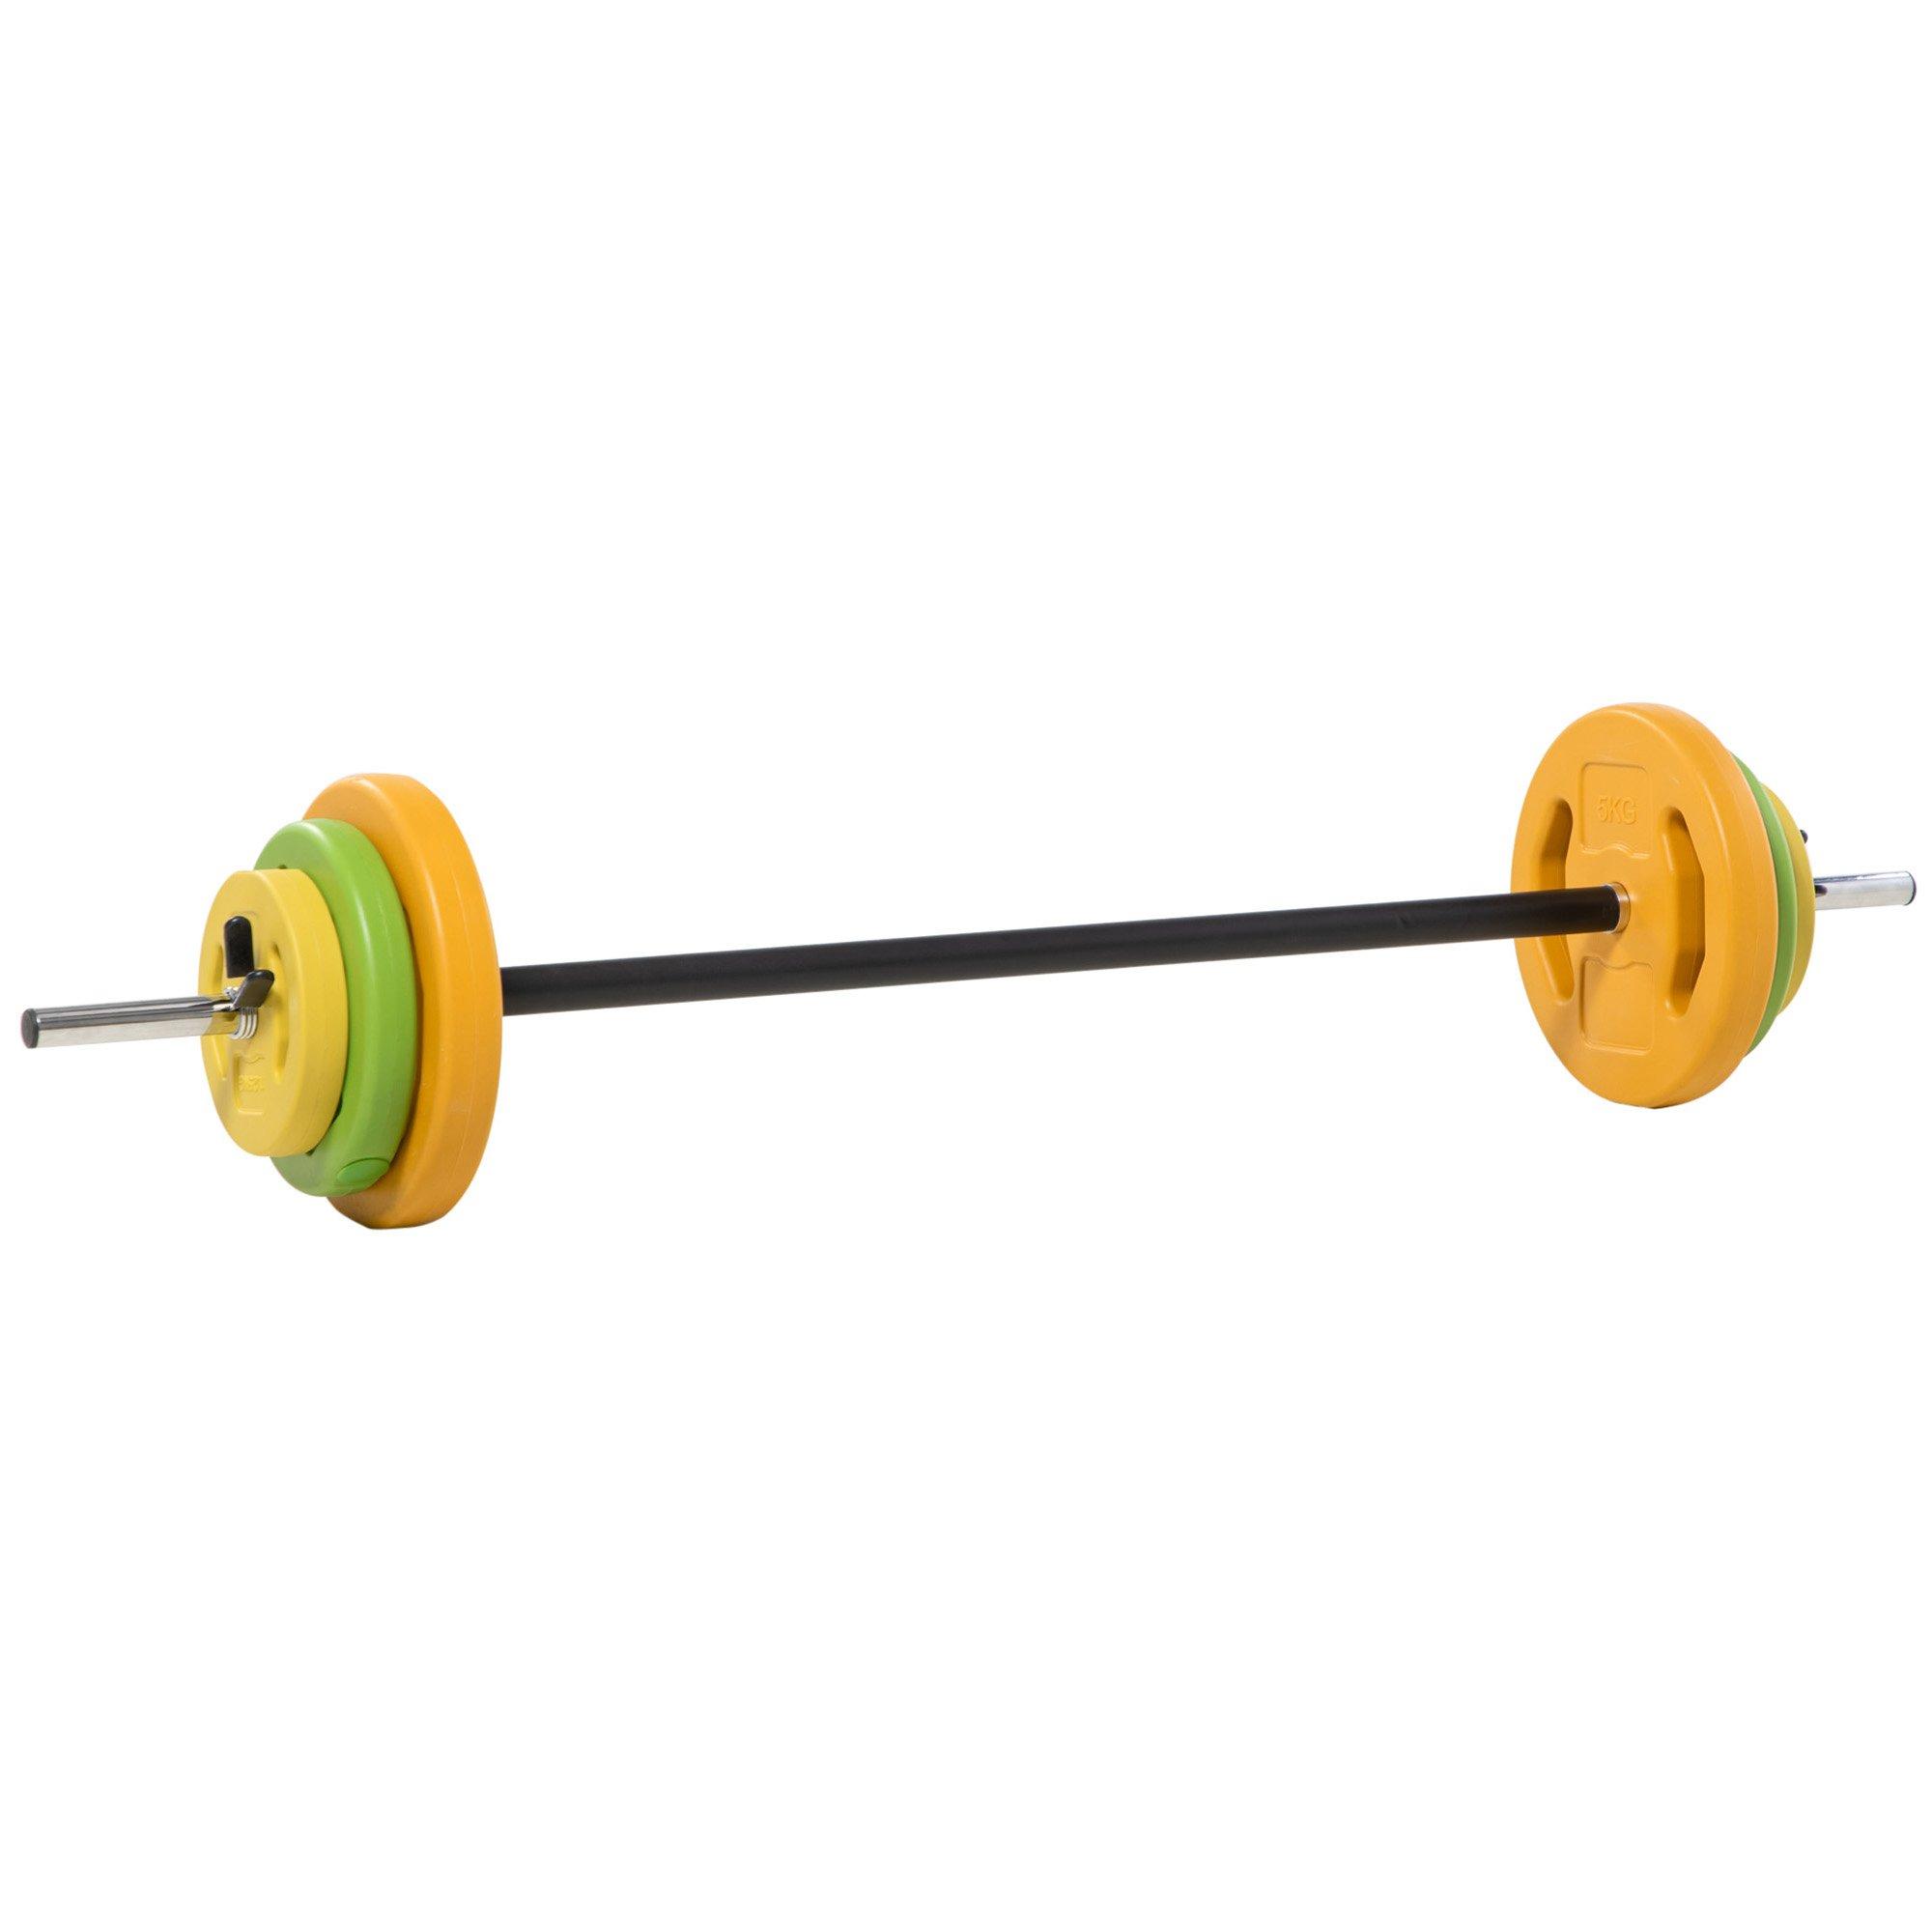 20kg Weights Barbell Set with Non slip Handle for Strength Training